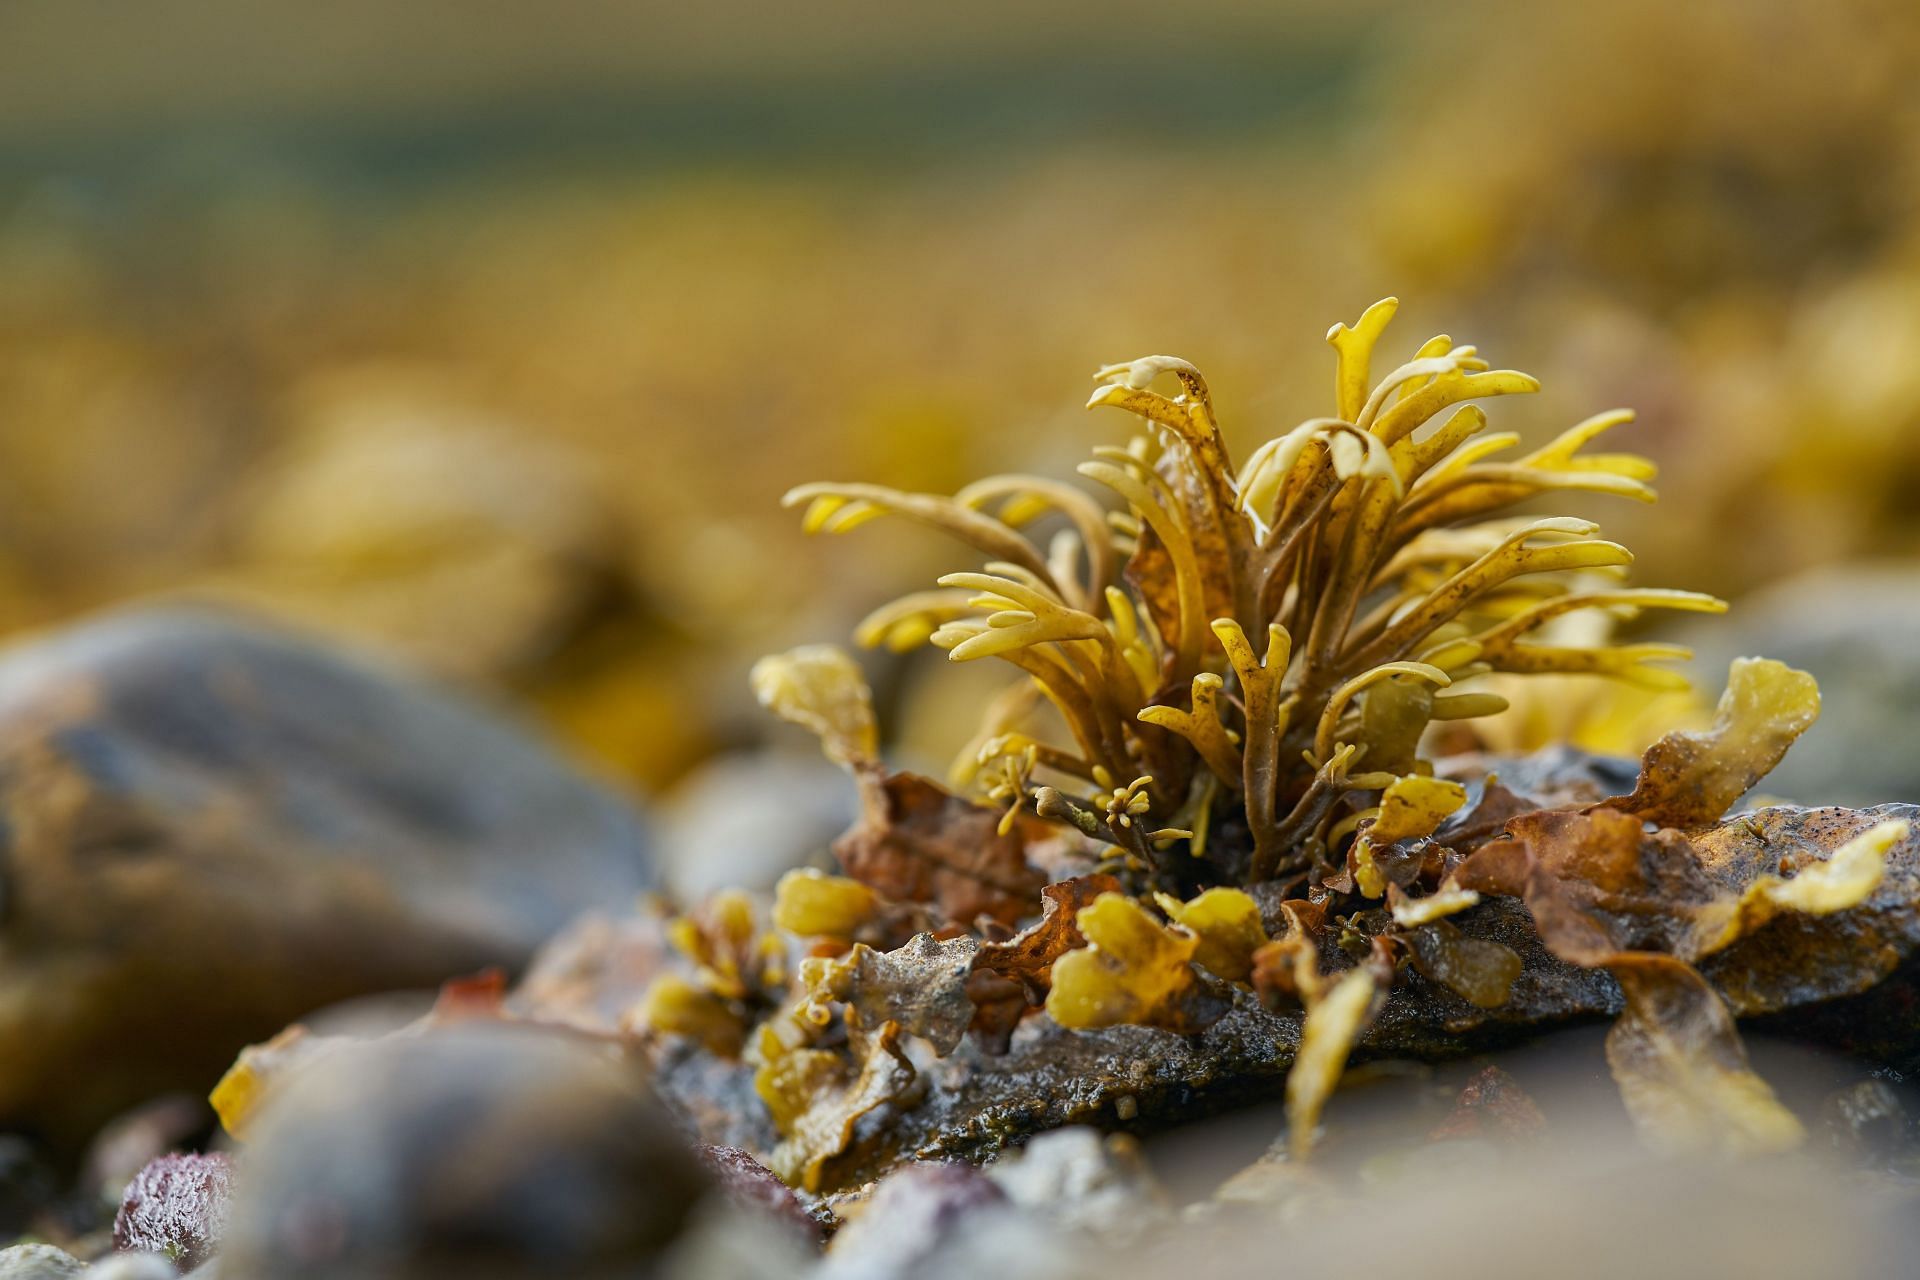 Sea moss provides various health benefits that can help you to lose weight. (Image via Unsplash / Wolfgang Hasselmann)